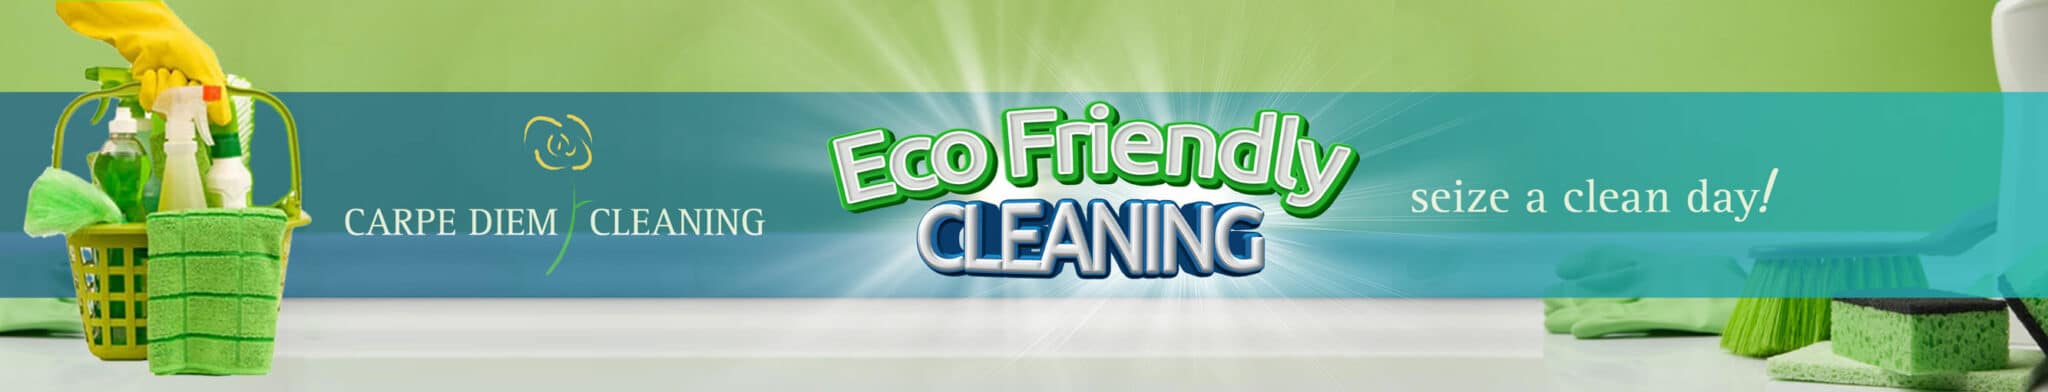 horizontal banner image with eco friendly cleaning text and some cleaning tools